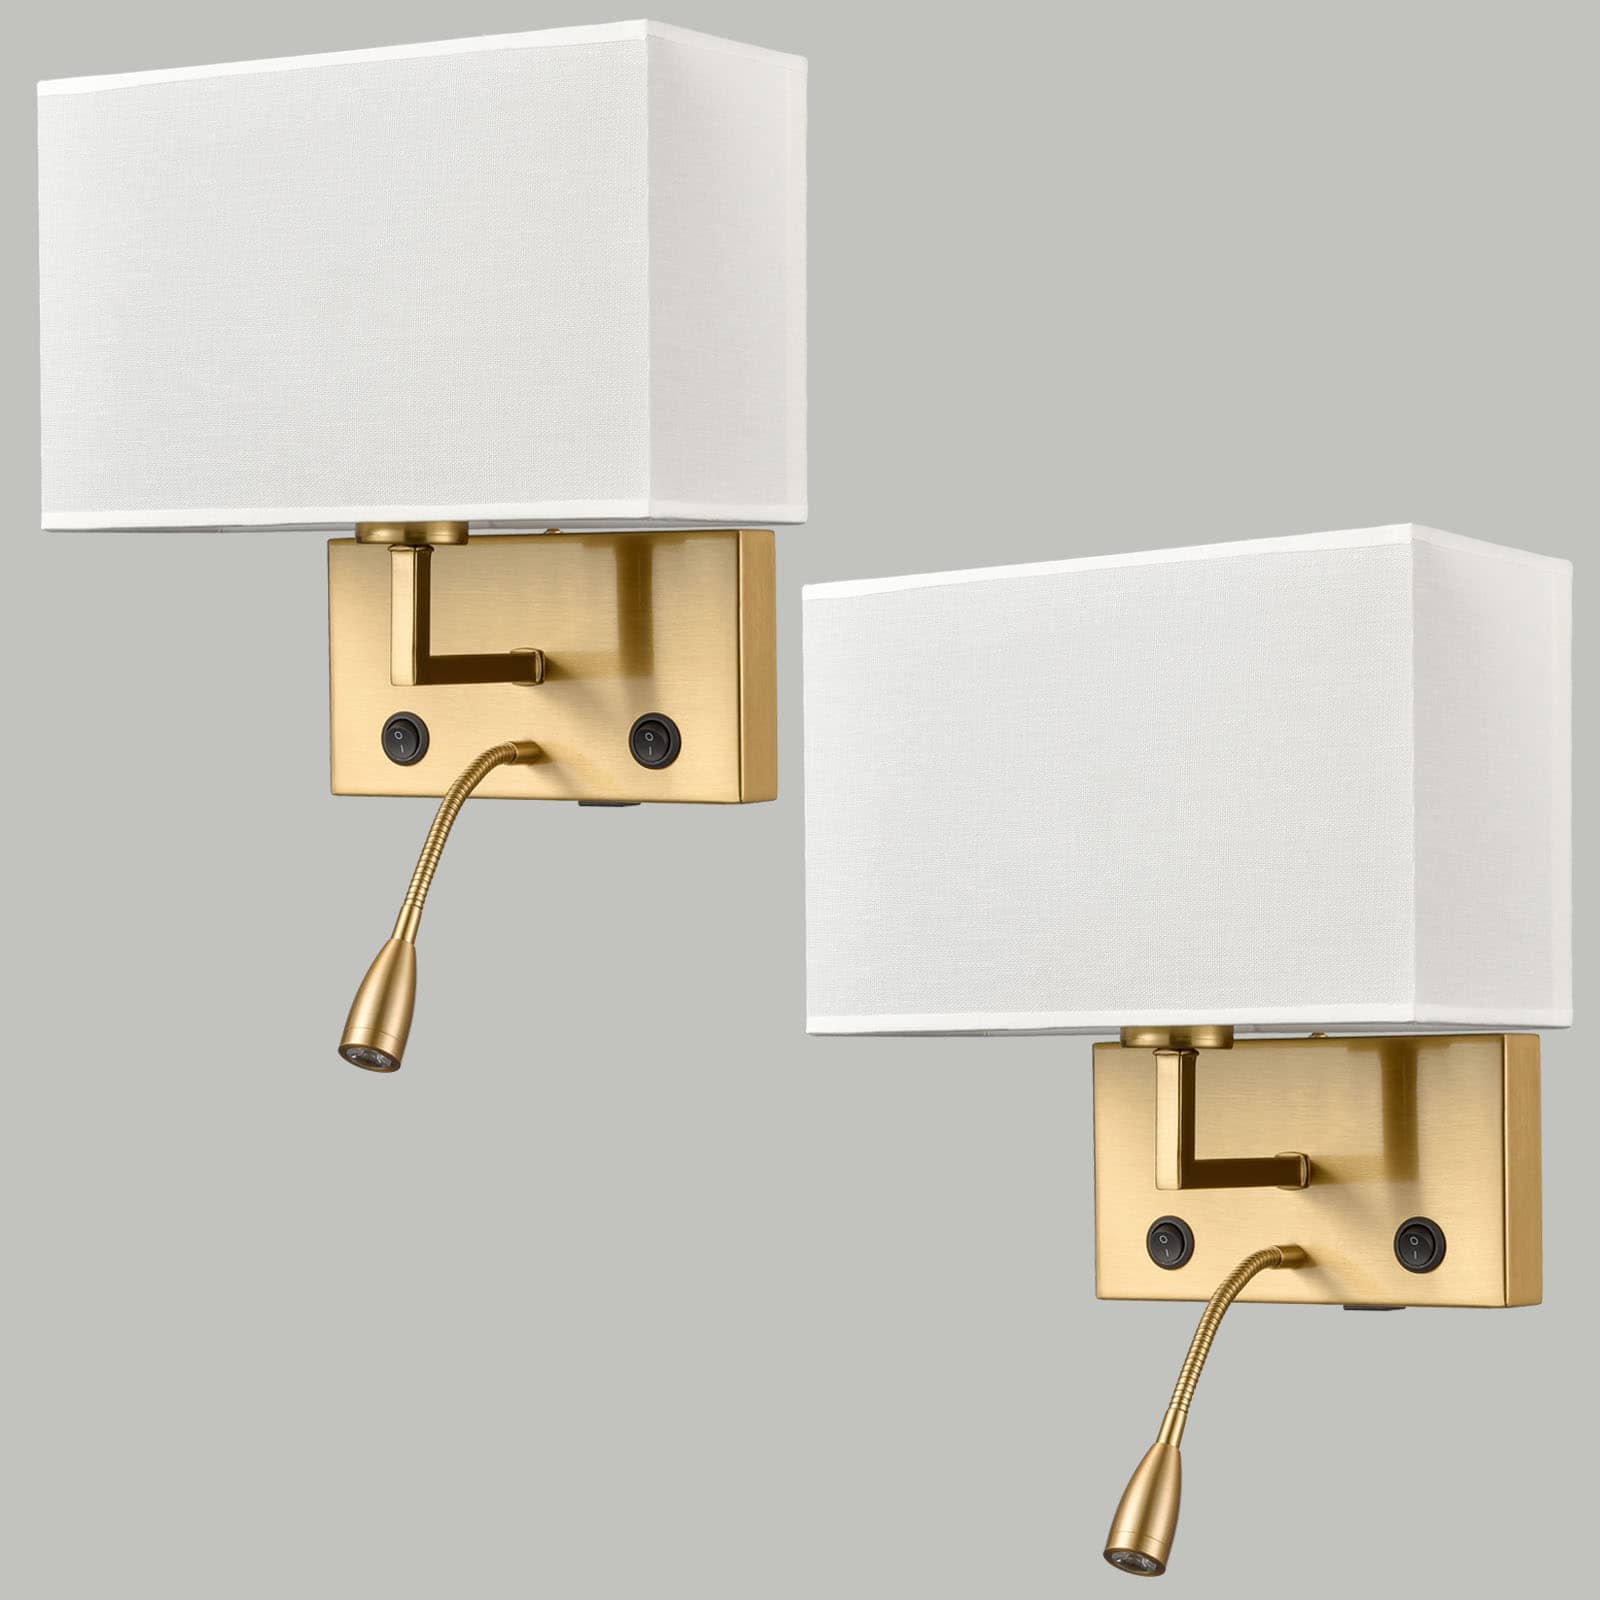 2-pack Modern Gold with white Fabric Wall Sconces with USB Charging Port|LED lighting|Twin on/off Switch for Bedroom